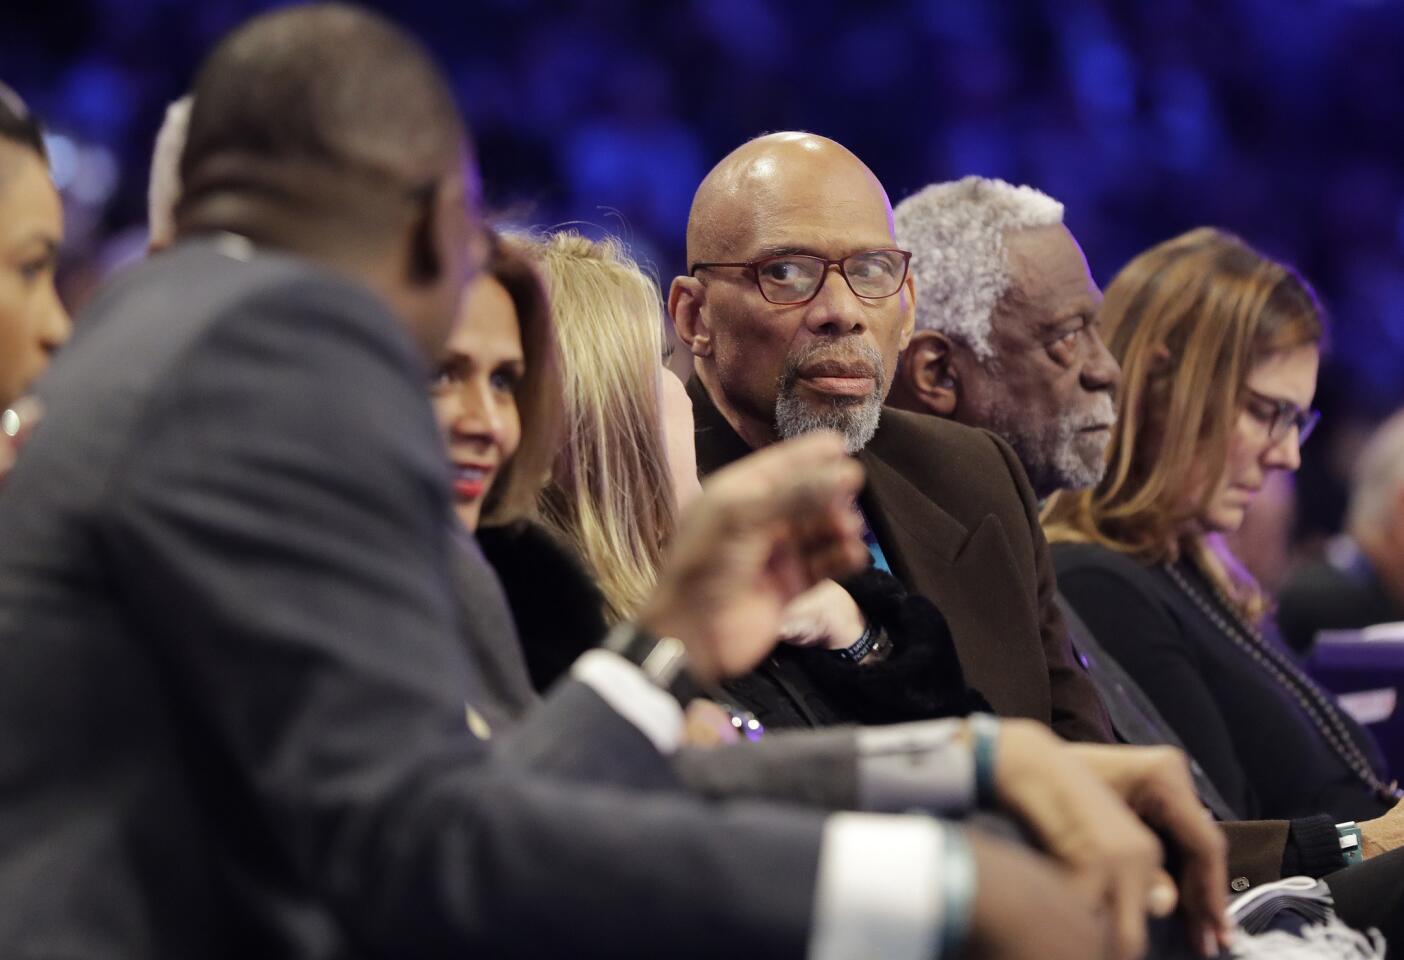 Hall of Famers Kareem Abdul-Jabbar, center, speaks with Dominique Wilkins, left, as they attend NBA All-Star Saturday Night along with Bill Russell.